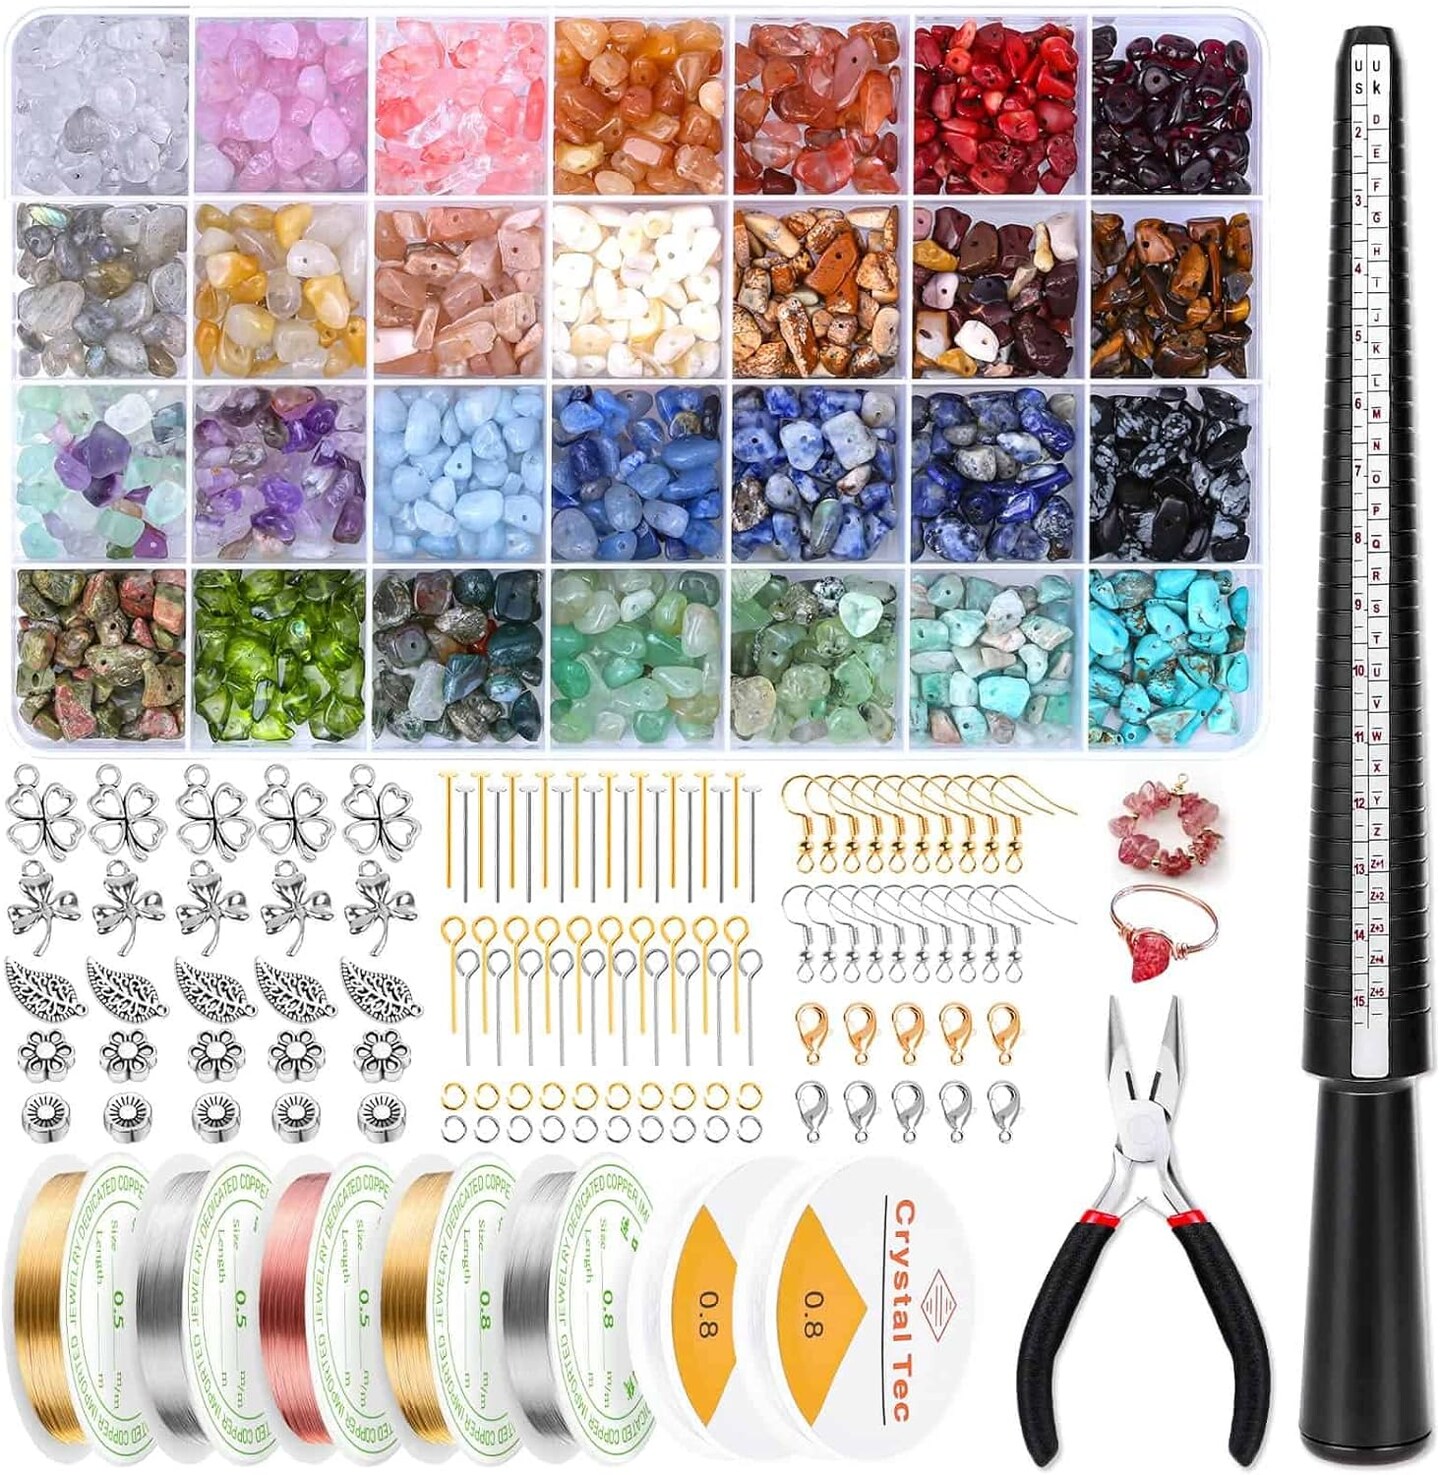 Ring Making Kit with Crystal Beads, 28 Colors Crystal Jewelry Making Kit with Crystals, Jewelry Wire, Pliers and Earring Making Supplies for Jewelry Making